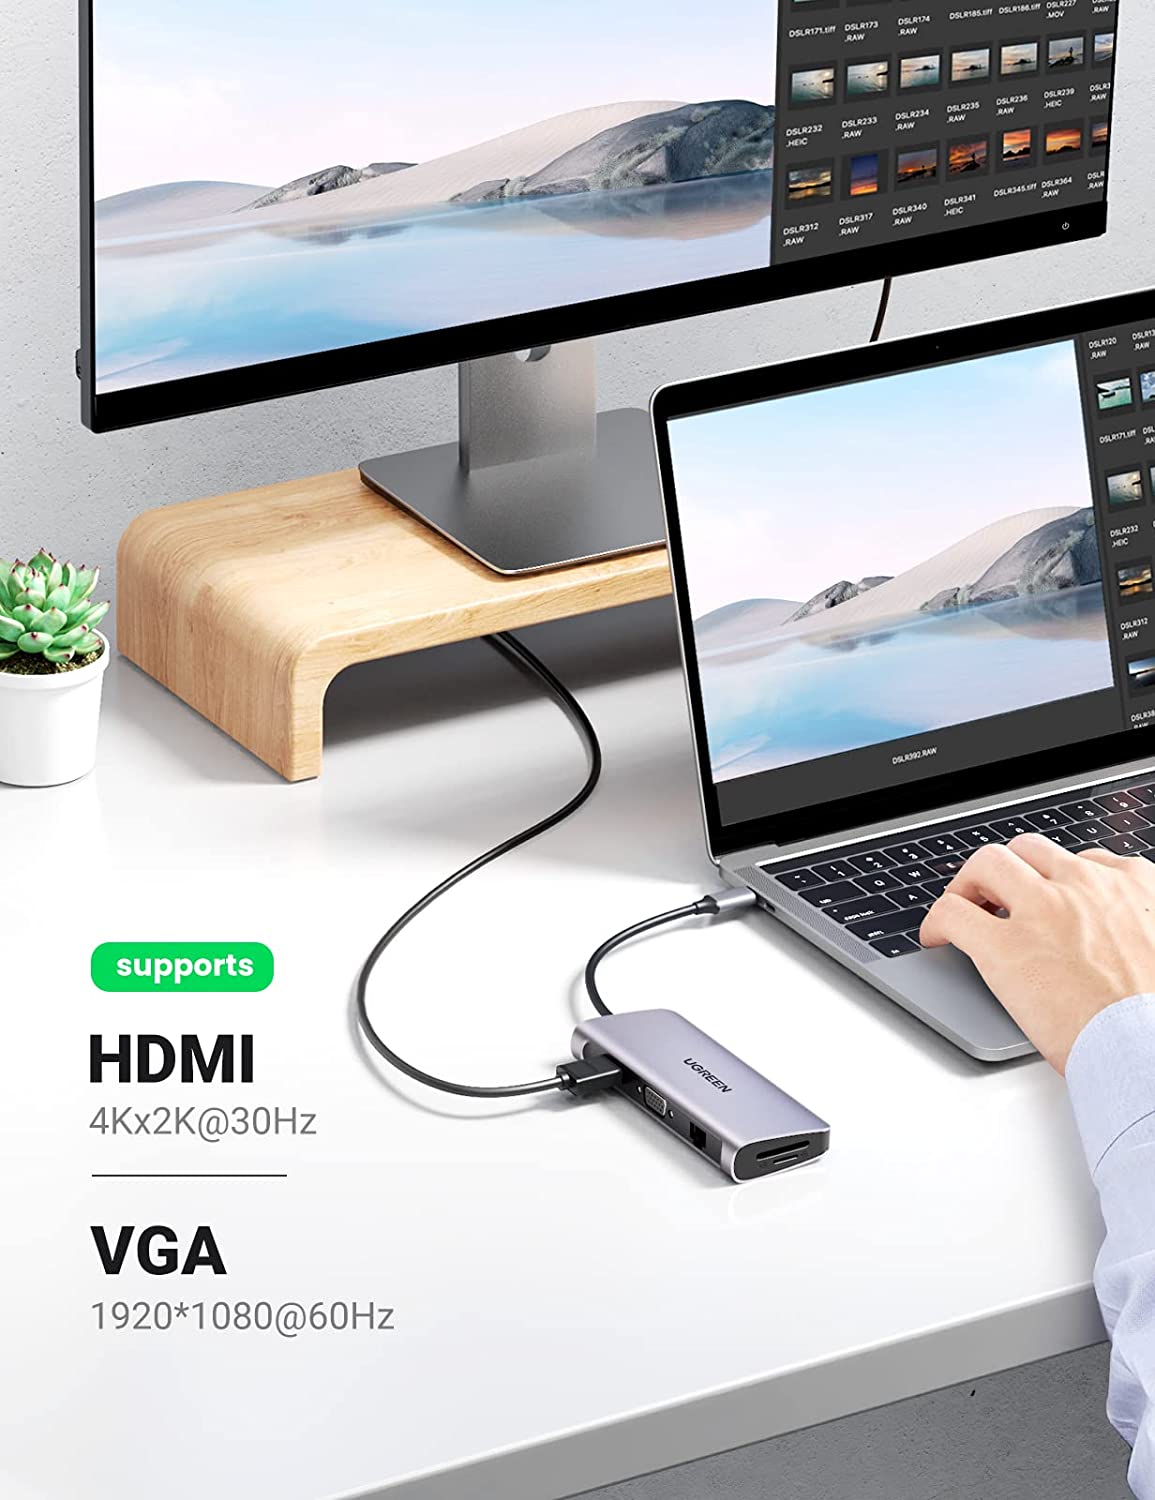 UGREEN USB C Hub Type C Adapter 3.1 with HDMI VGA, Power Delivery Charging,  Gigabit Ethernet Port, 3 USB 3.0 Ports, Micro SD Card Reader for Apple